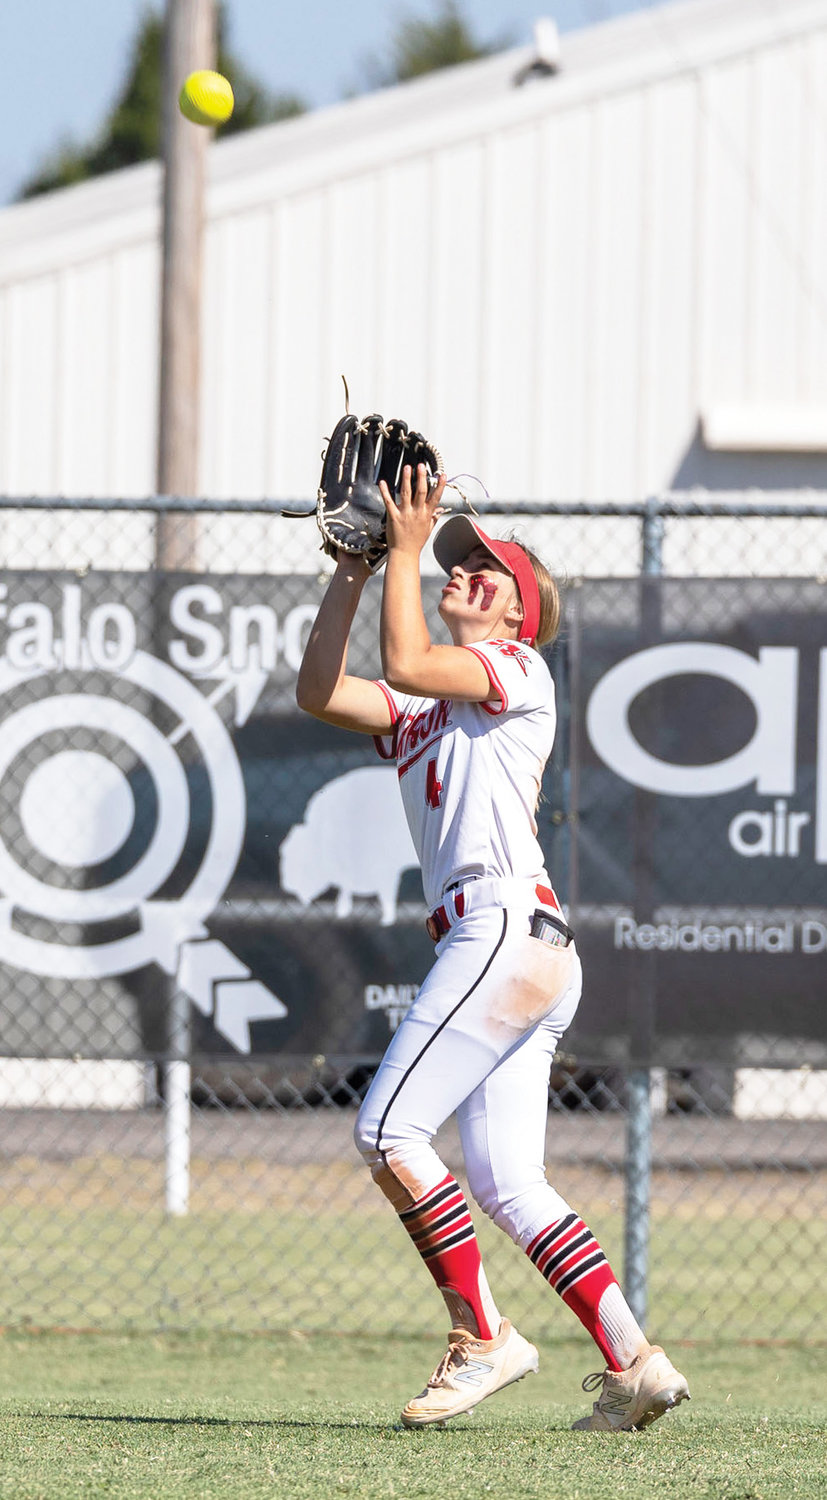 Washington senior Abby Wood settles under a fly ball during the Warriors’ 3-0 win over Purcell in the Regional tournament. The Warriors punched their ticket to the State tournament where they play Morris today (Thursday) at Hall Of Fame Stadium at 11 a.m.